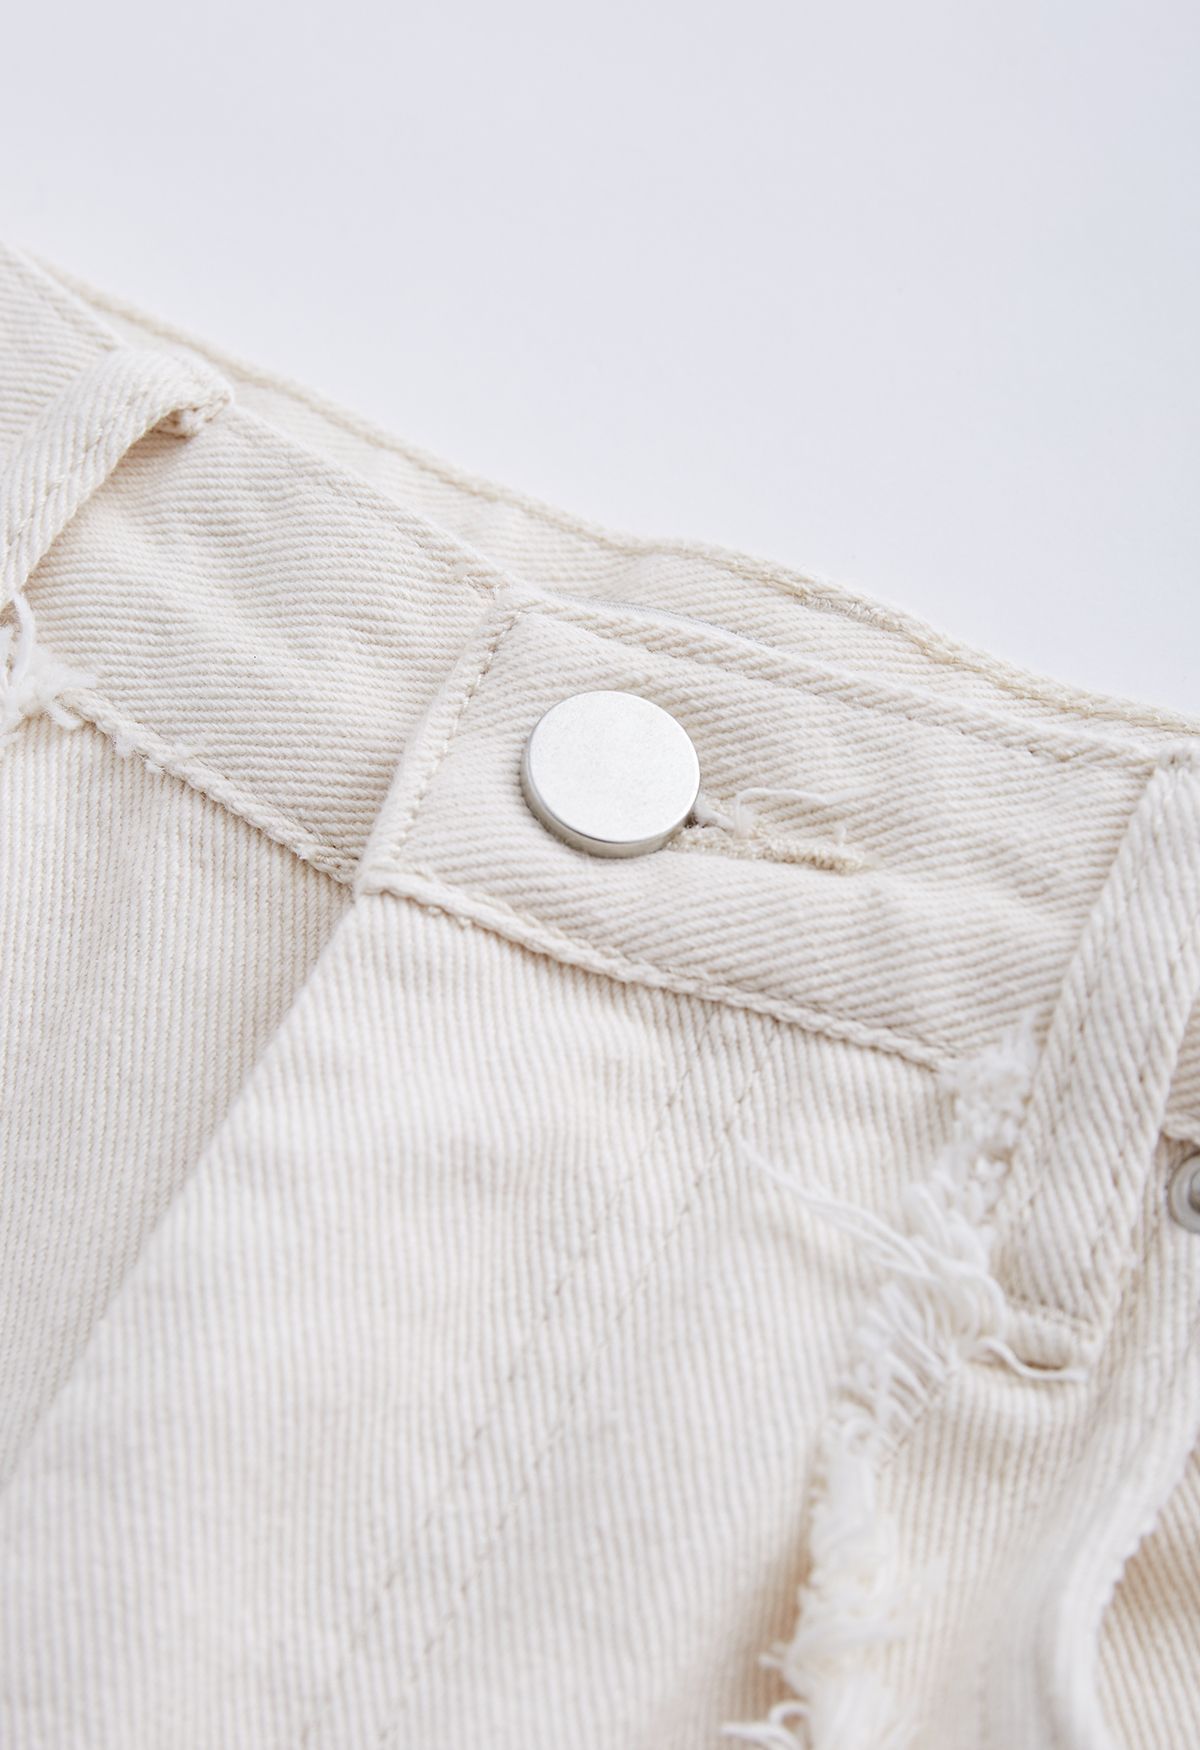 Classic Pocket Frayed Detail Flare Jeans in Ivory